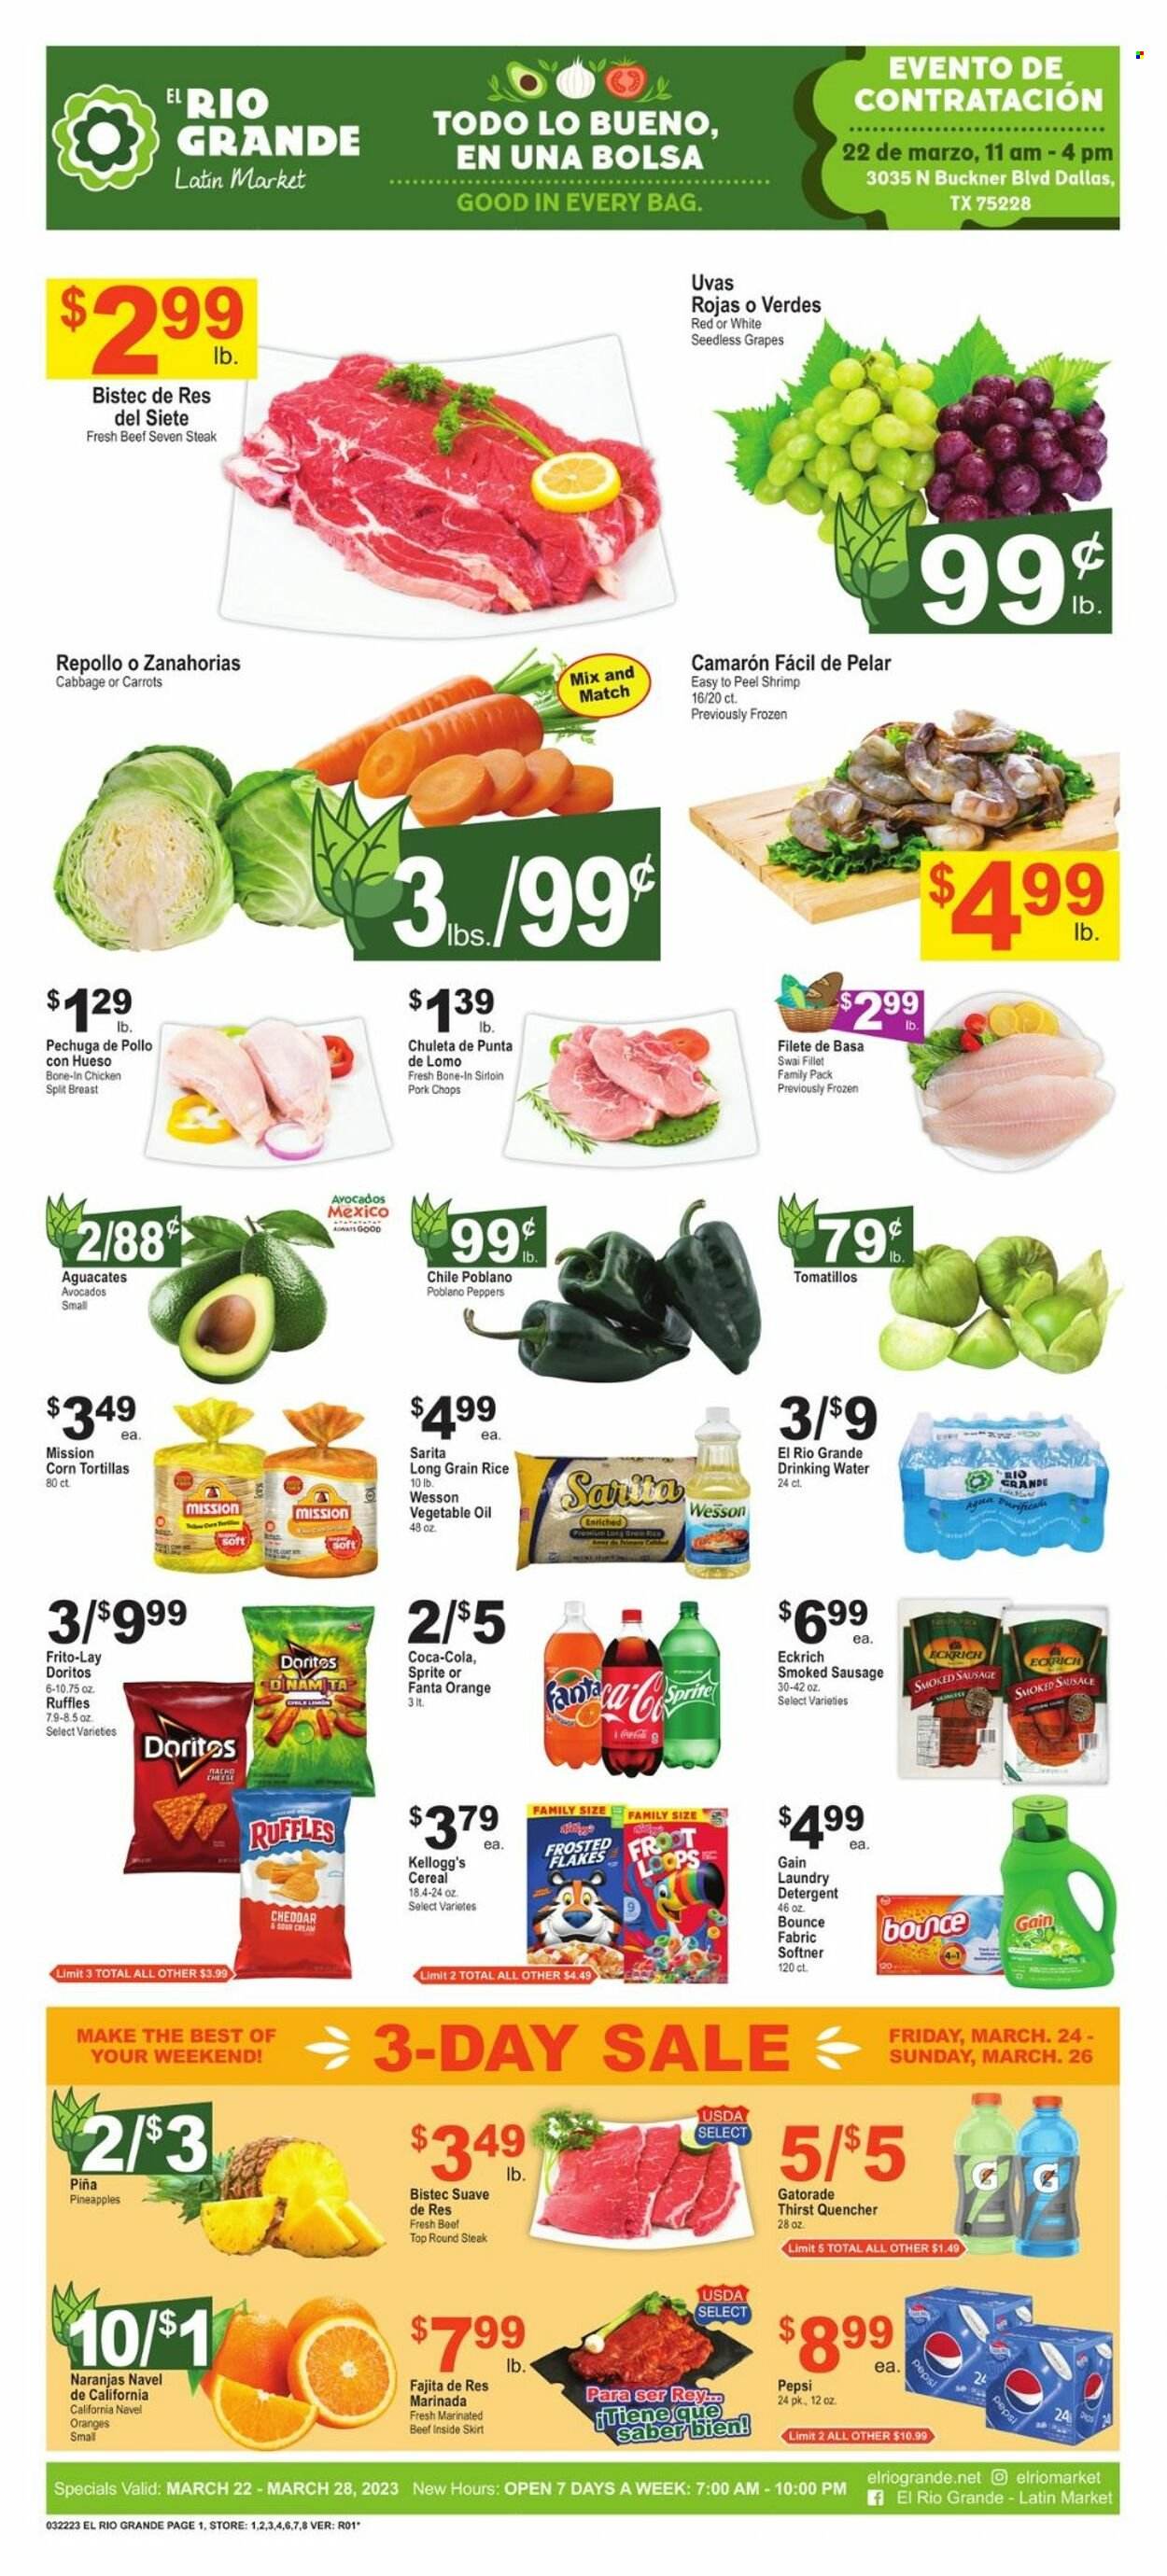 thumbnail - El Rio Grande Flyer - 03/22/2023 - 03/28/2023 - Sales products - corn tortillas, tortillas, carrots, tomatillo, peppers, avocado, grapes, seedless grapes, pineapple, oranges, shrimps, swai fillet, fajita, sausage, smoked sausage, cheese, sour cream, Kellogg's, Doritos, Frito-Lay, Ruffles, cereals, Frosted Flakes, rice, long grain rice, vegetable oil, oil, Coca-Cola, Sprite, Pepsi, Fanta, Gatorade, water, chicken breasts, chicken, beef meat, steak, round steak, marinated beef, pork chops, pork meat, navel oranges. Page 1.